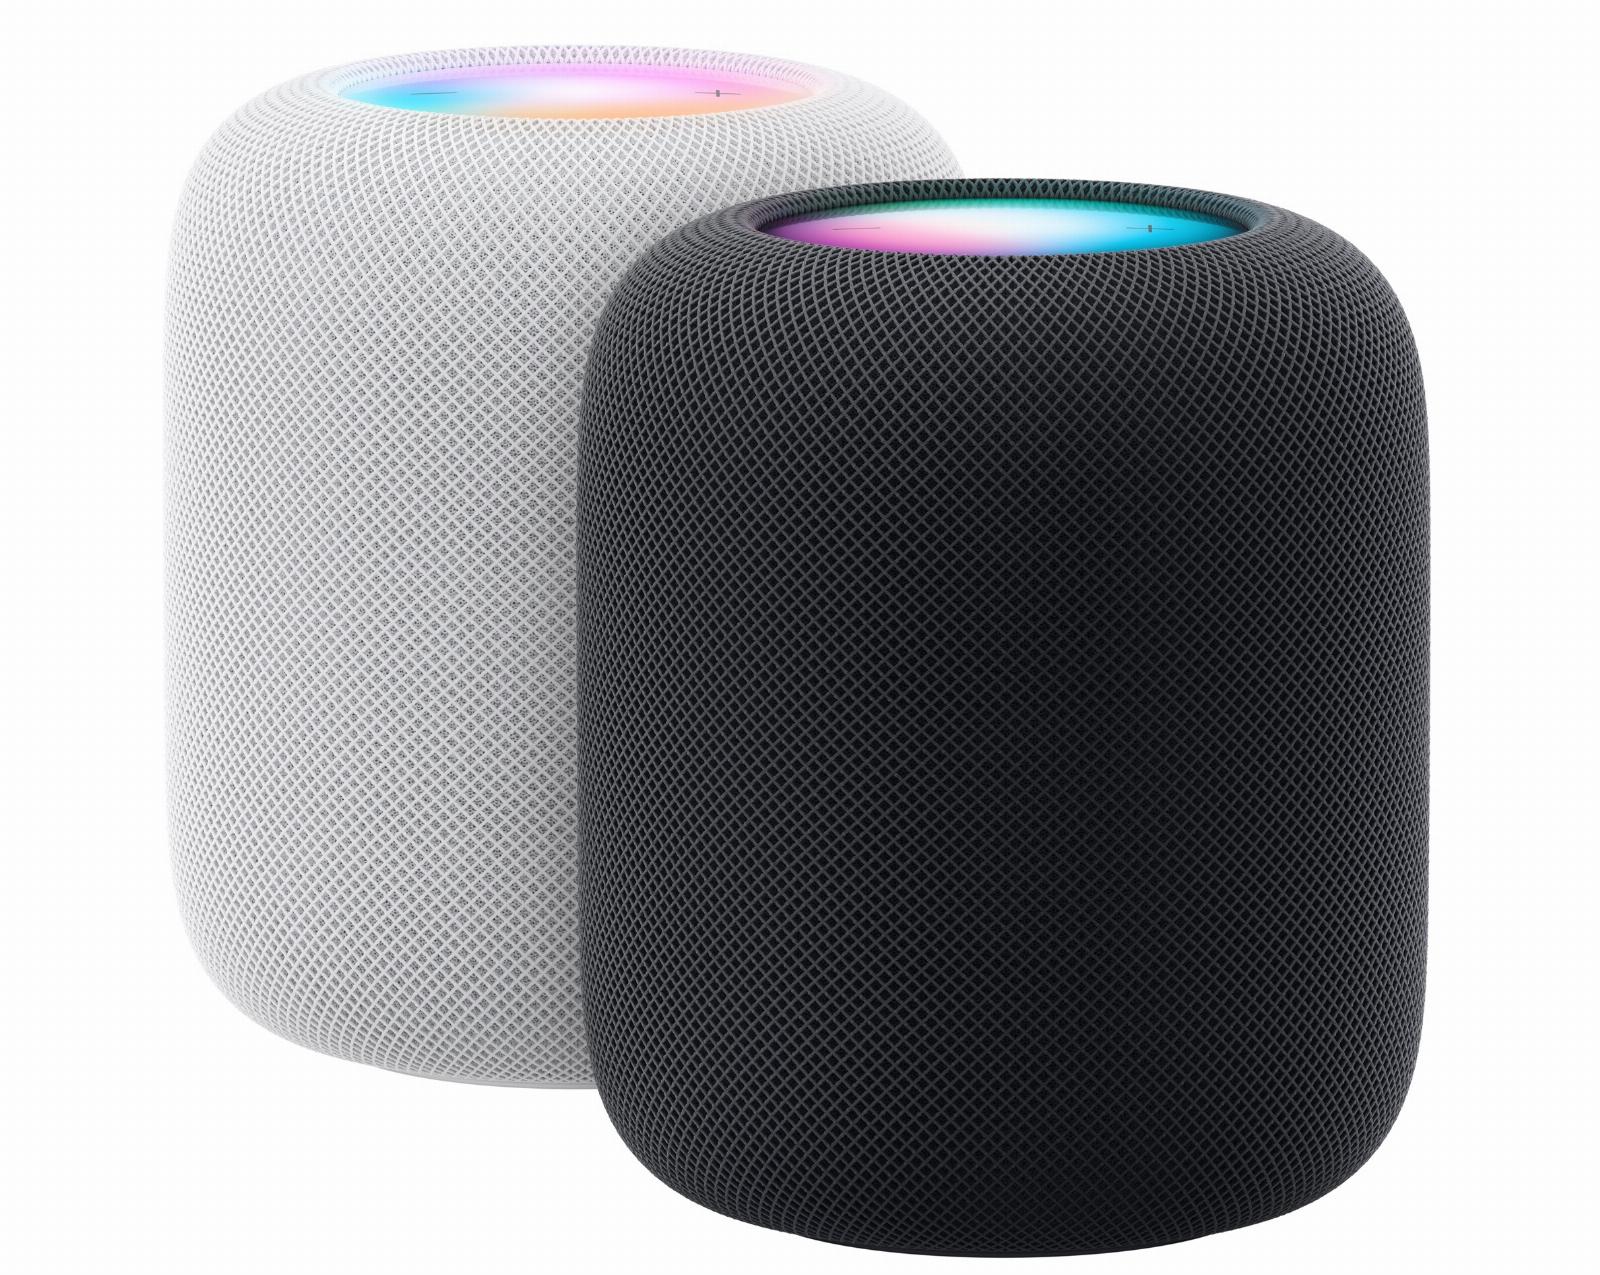 Apple introduces a brand new HomePod with better sound and smarts